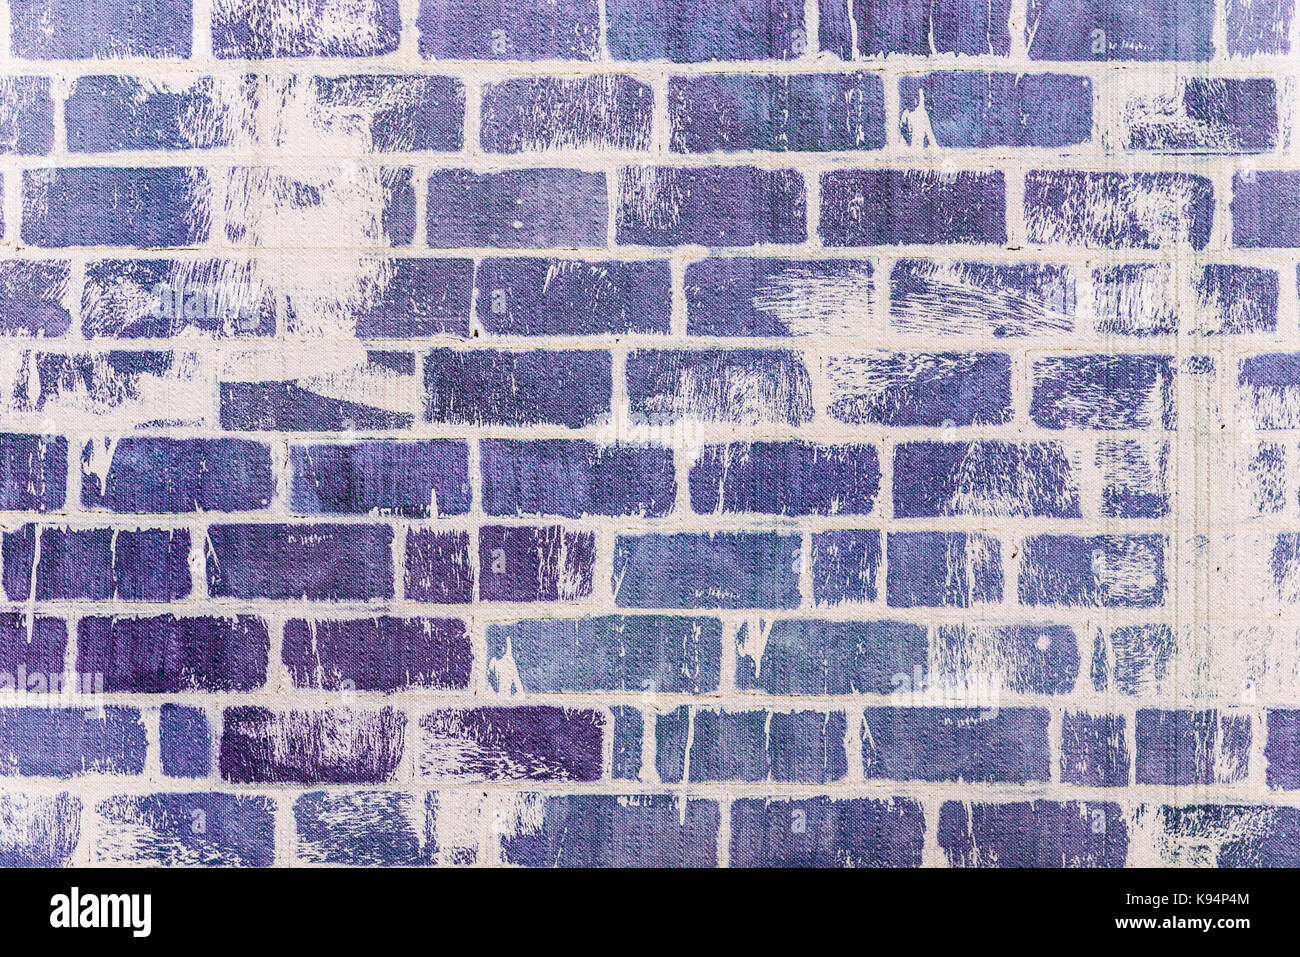 Purple brick wall texture industrial background for commercial use. Rough grunge blue texture imitation of old, used, weathered, brick wall. High reso Stock Photo